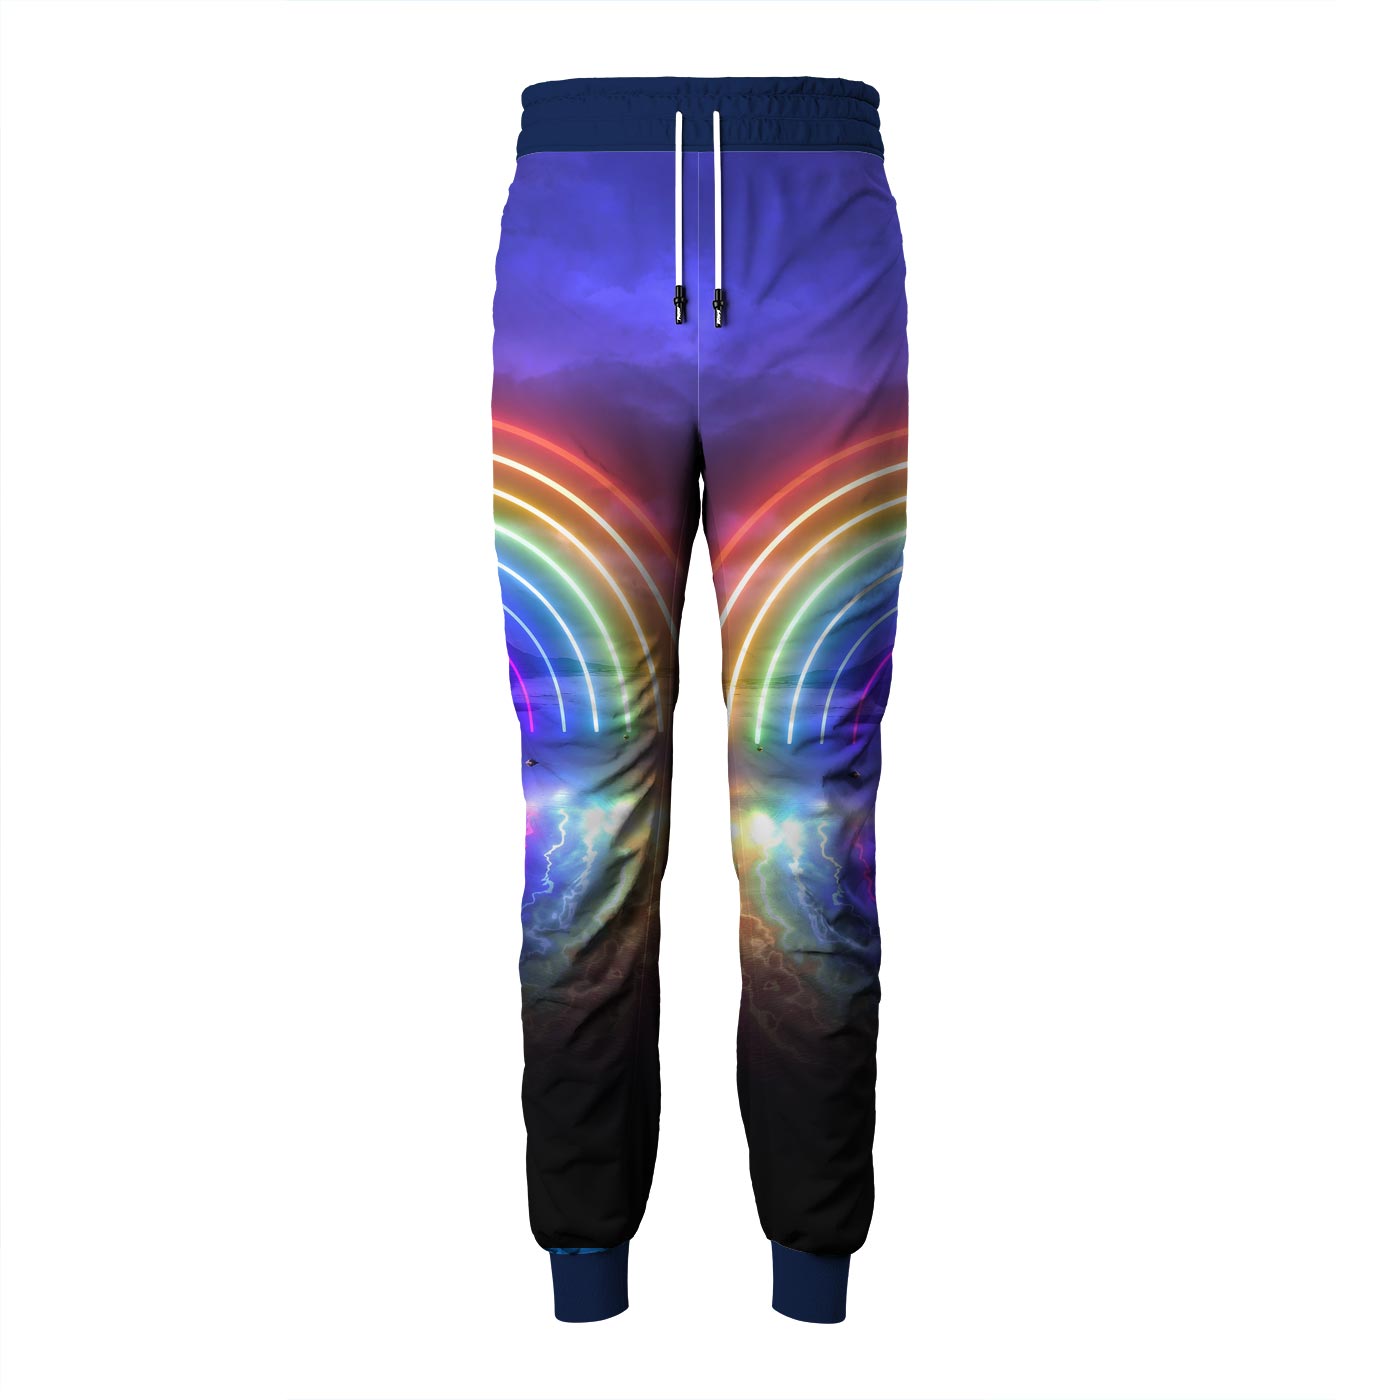 Subspace Frequency Sweatpants